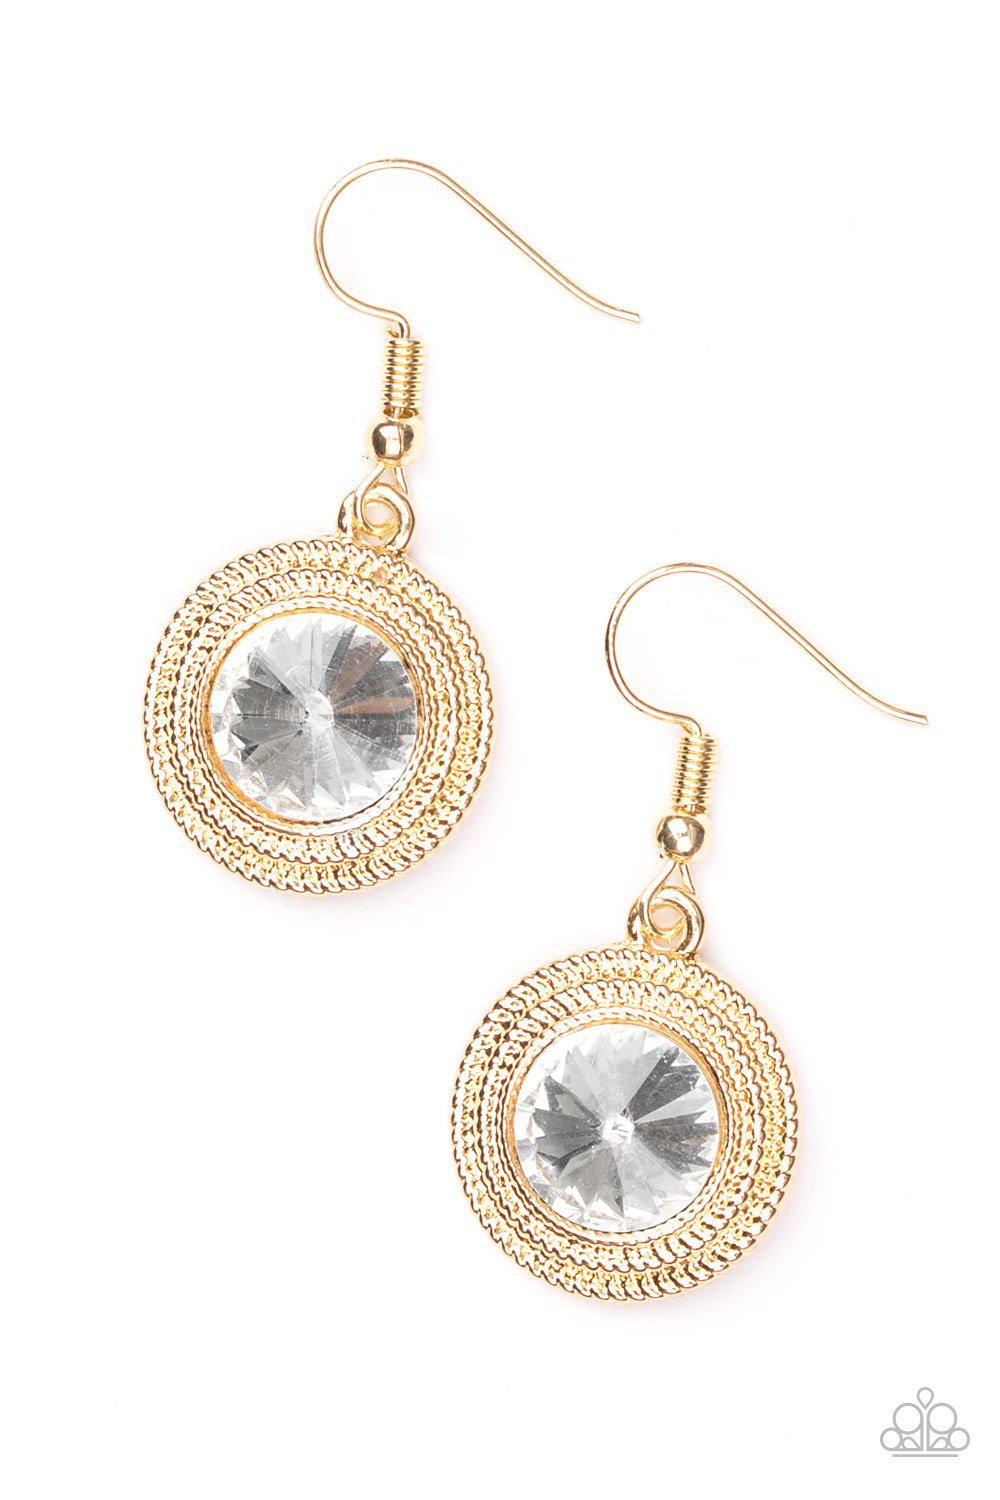 Beginners Luxe Gold Earrings - Paparazzi Accessories-CarasShop.com - $5 Jewelry by Cara Jewels